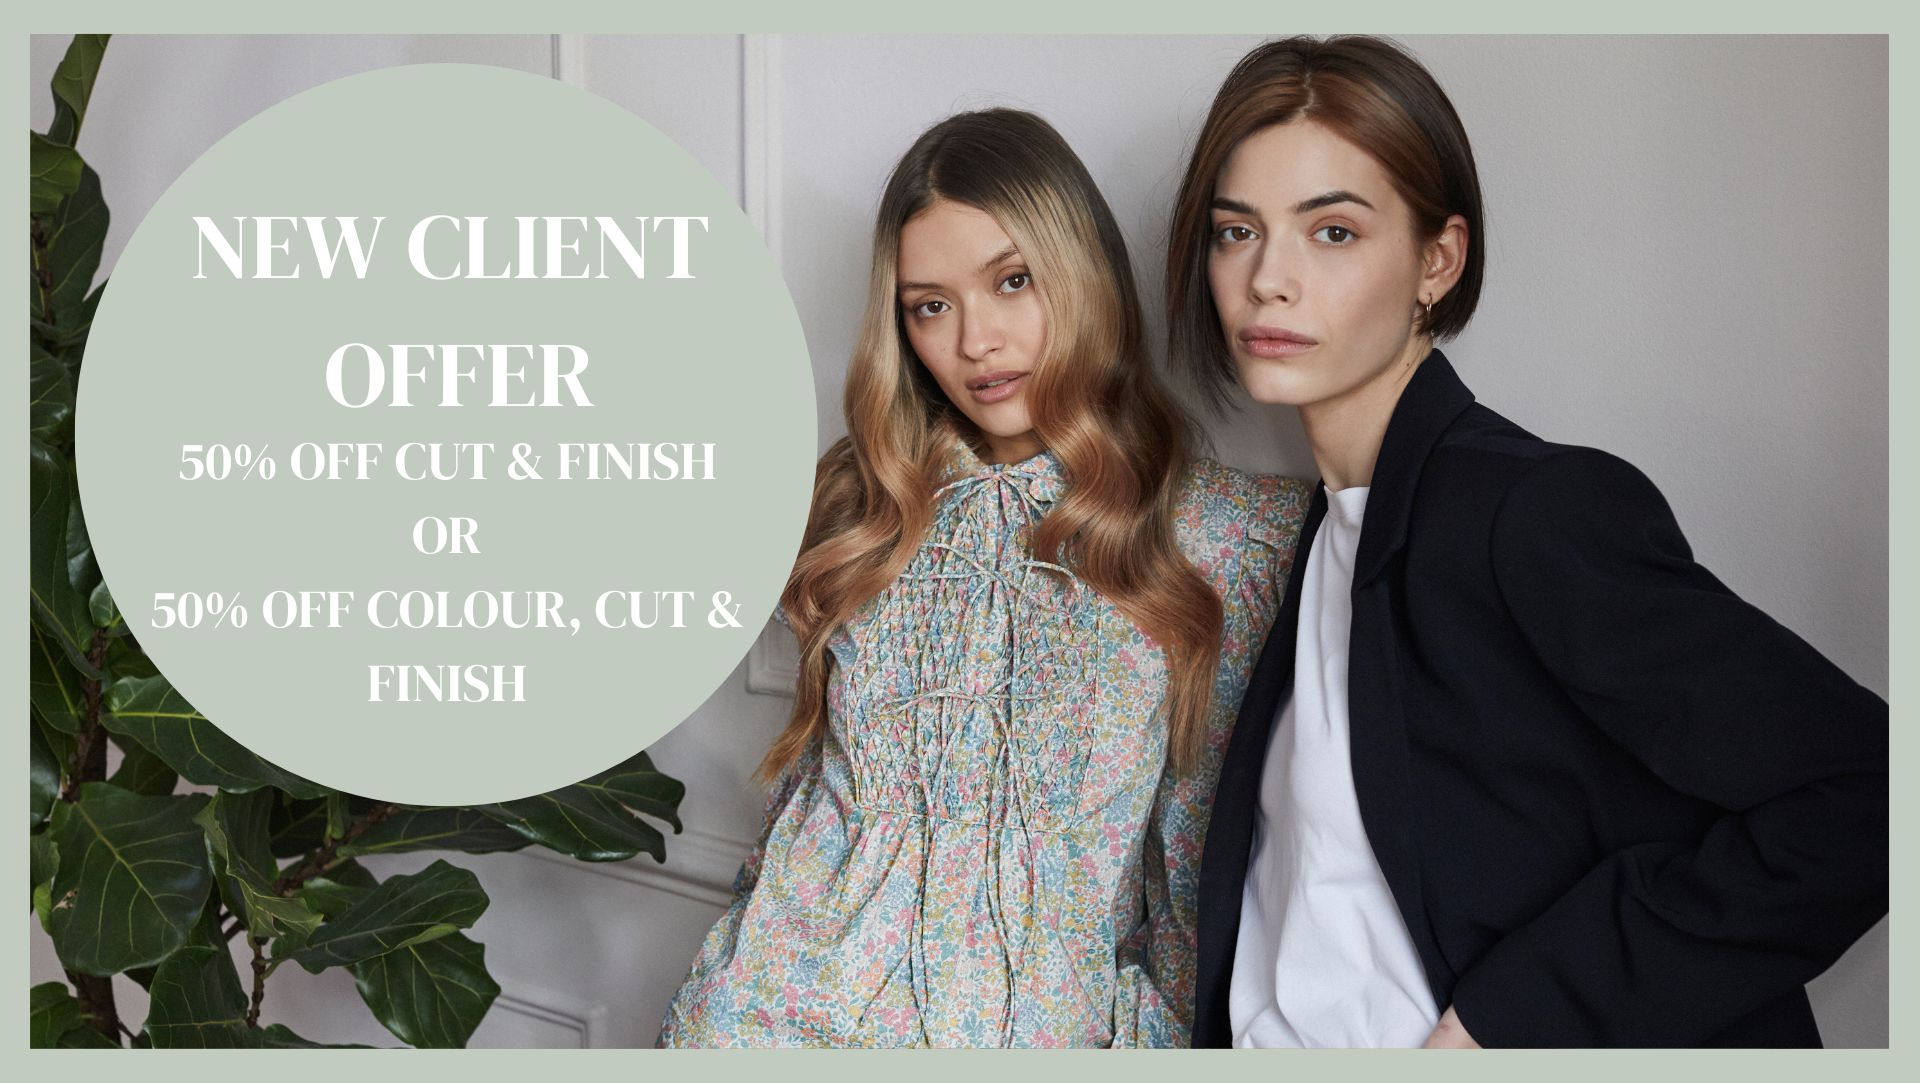 NEW CLIENT OFFER 50% OFF HAIR SERVICES IN HARROGATE